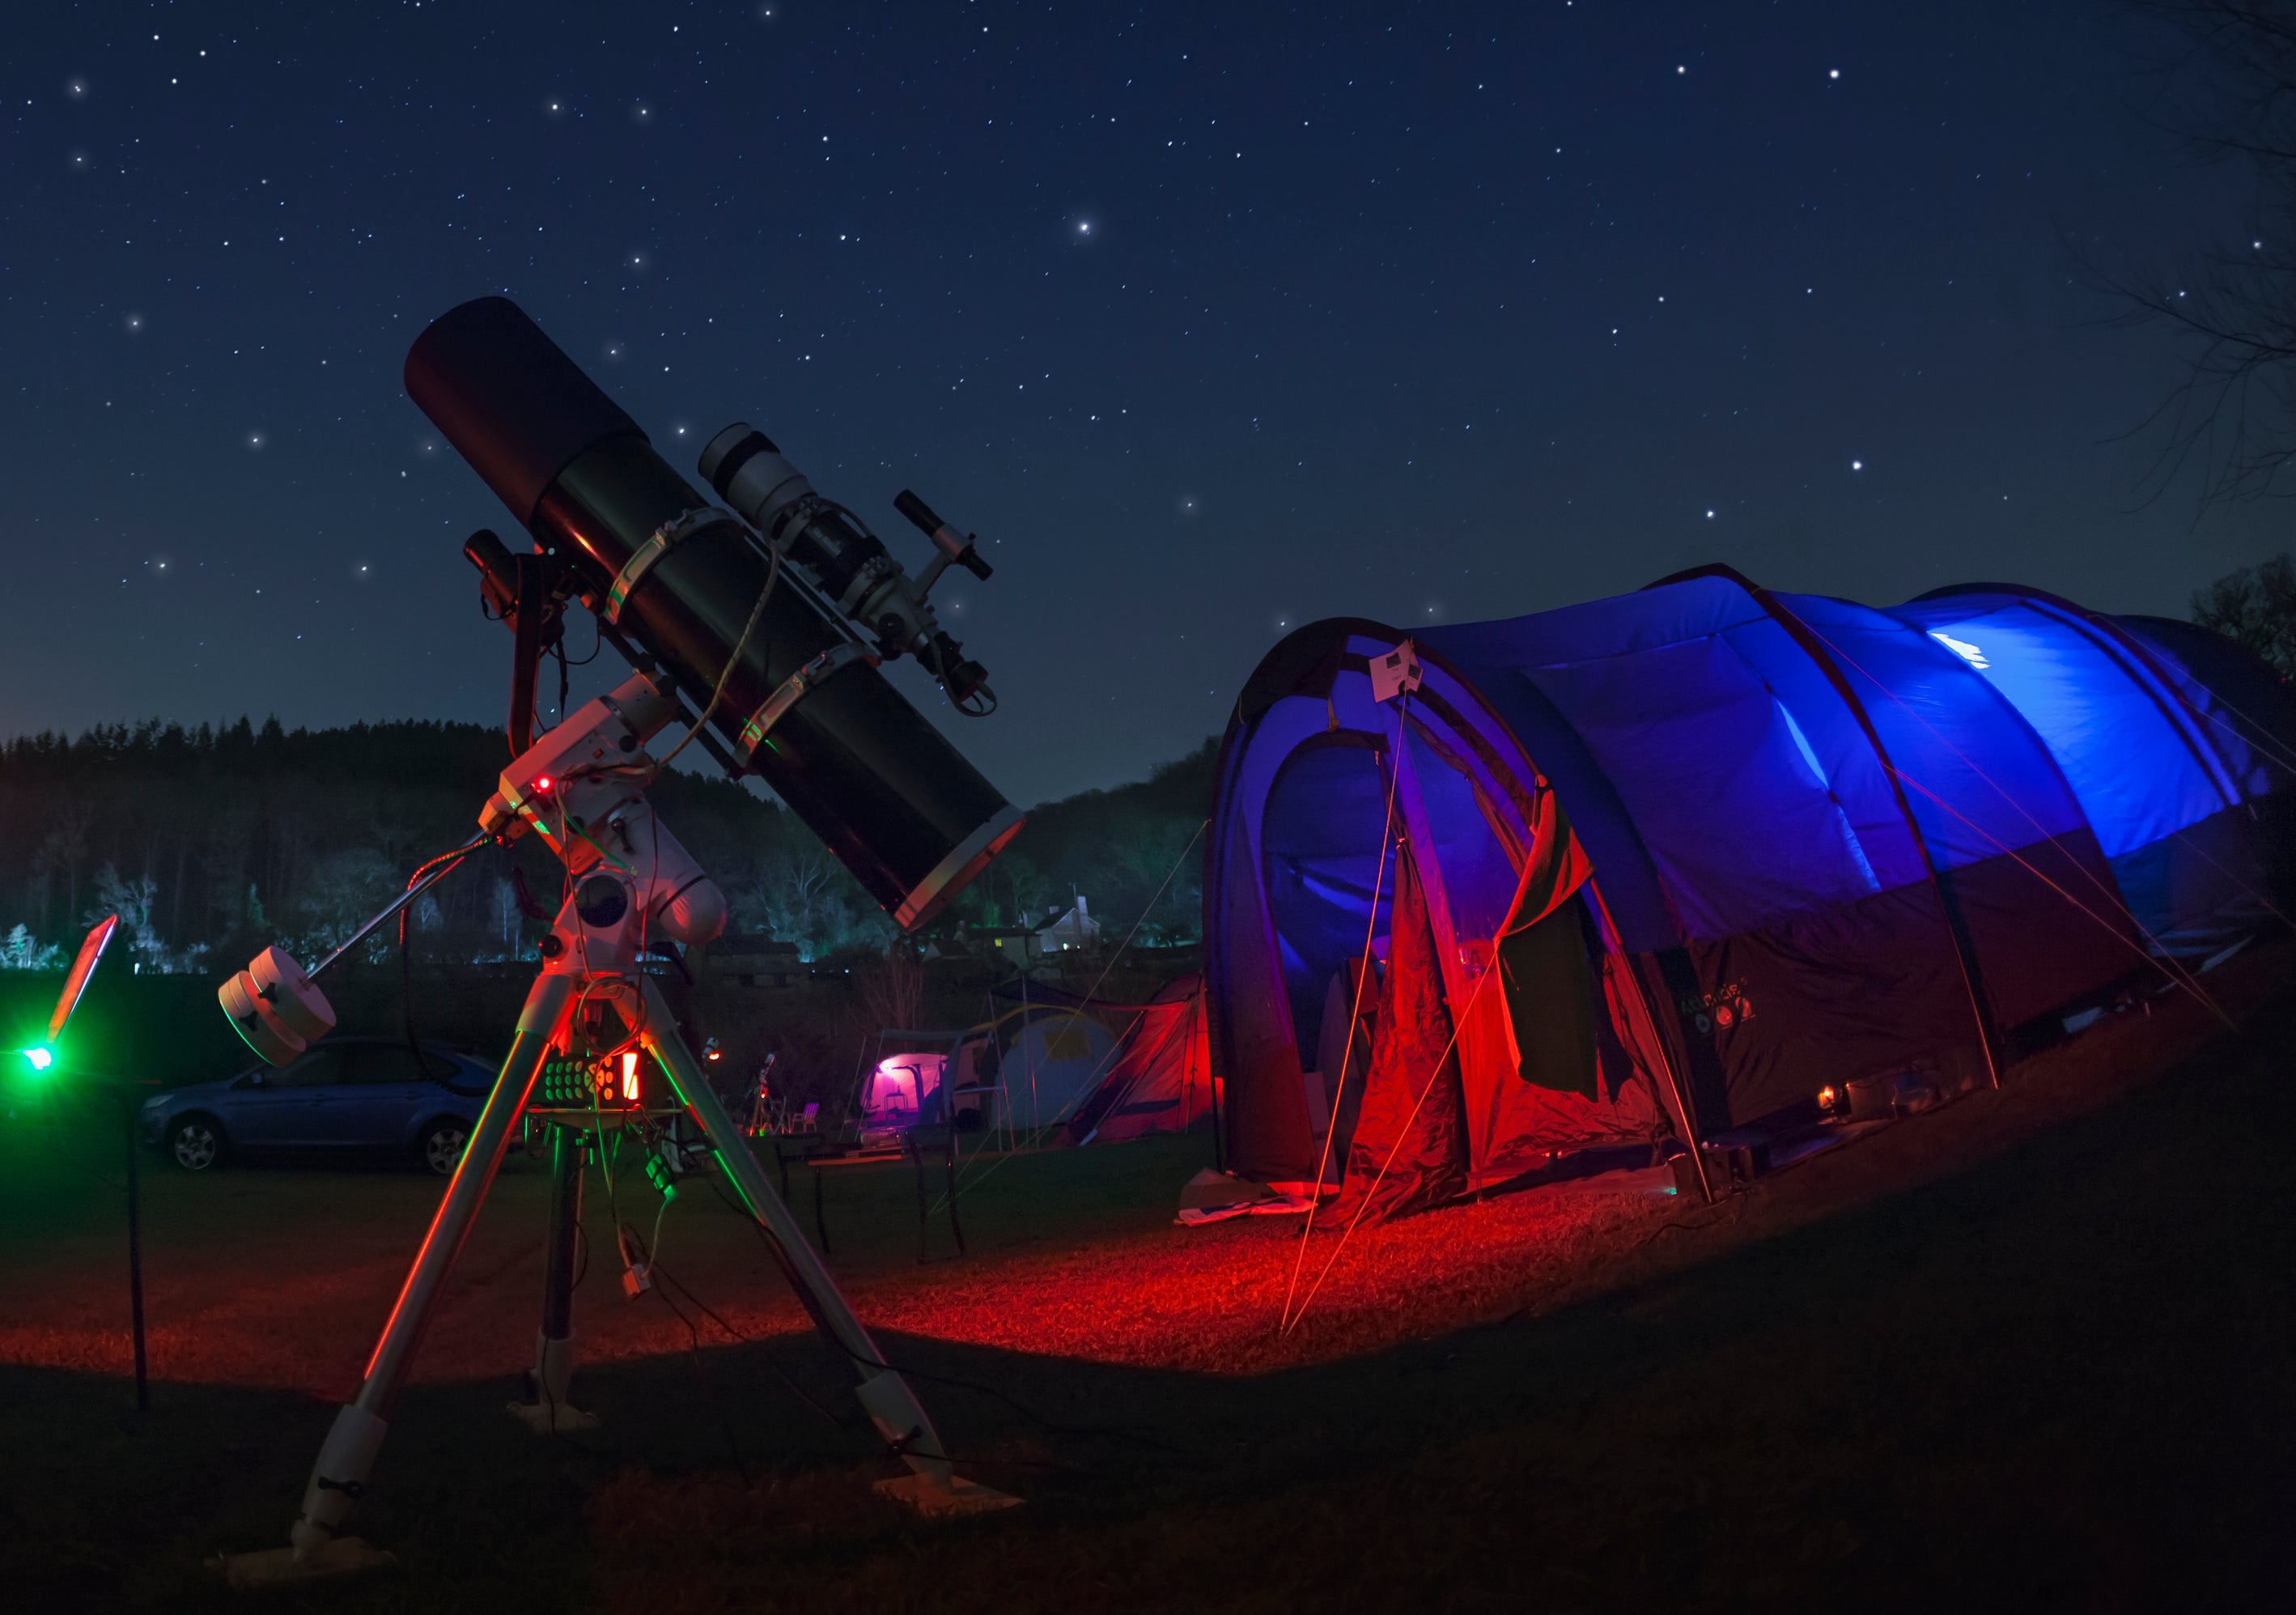 A telescope next to a tent at night